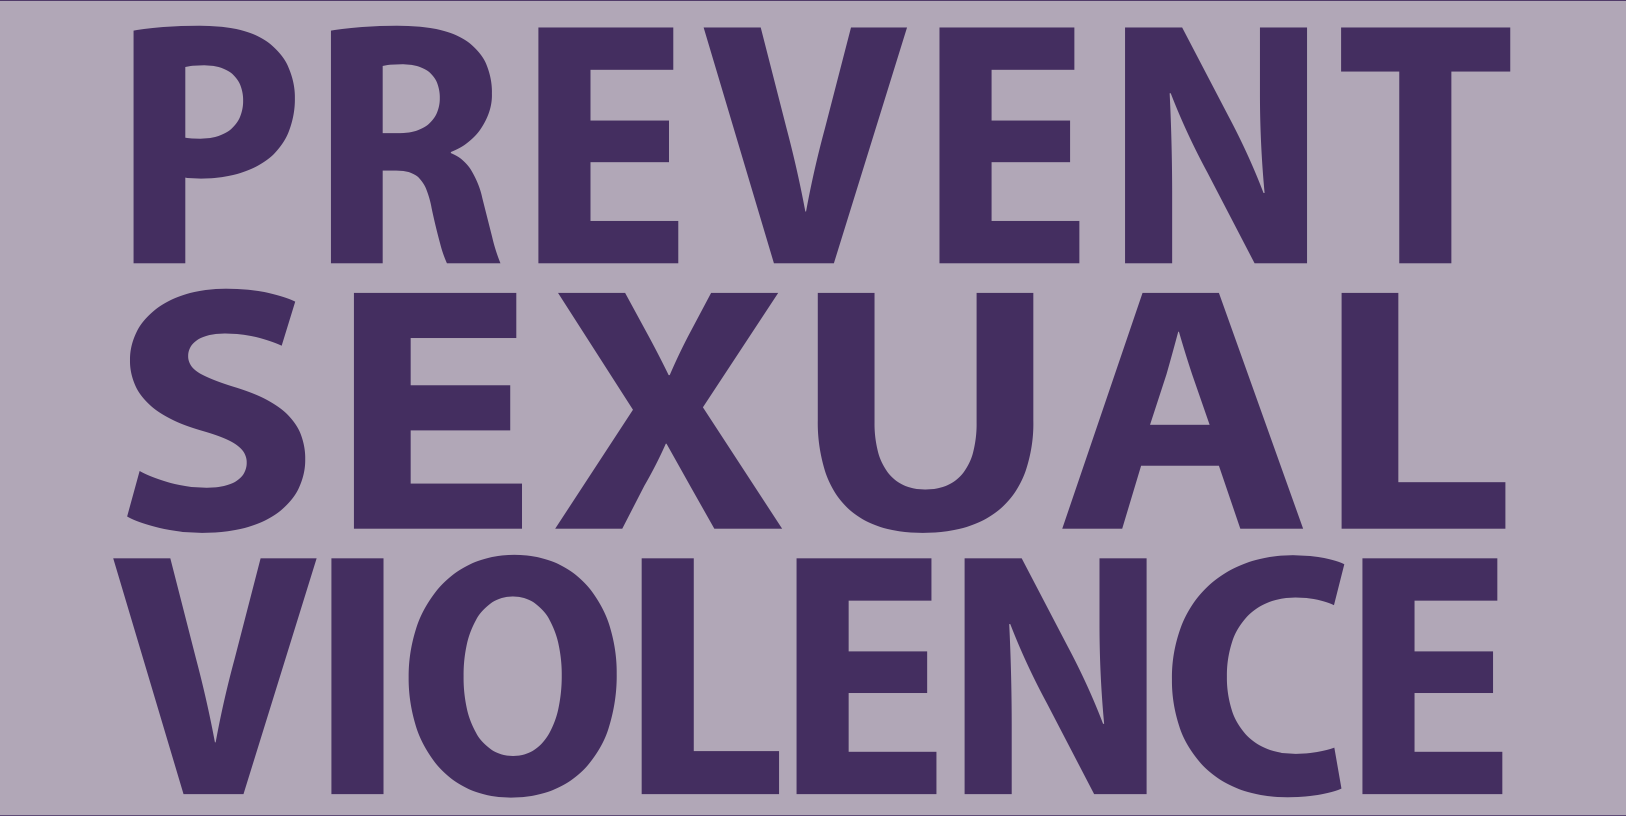 Have Your Say With The Prevent Sexual Violence Campaign